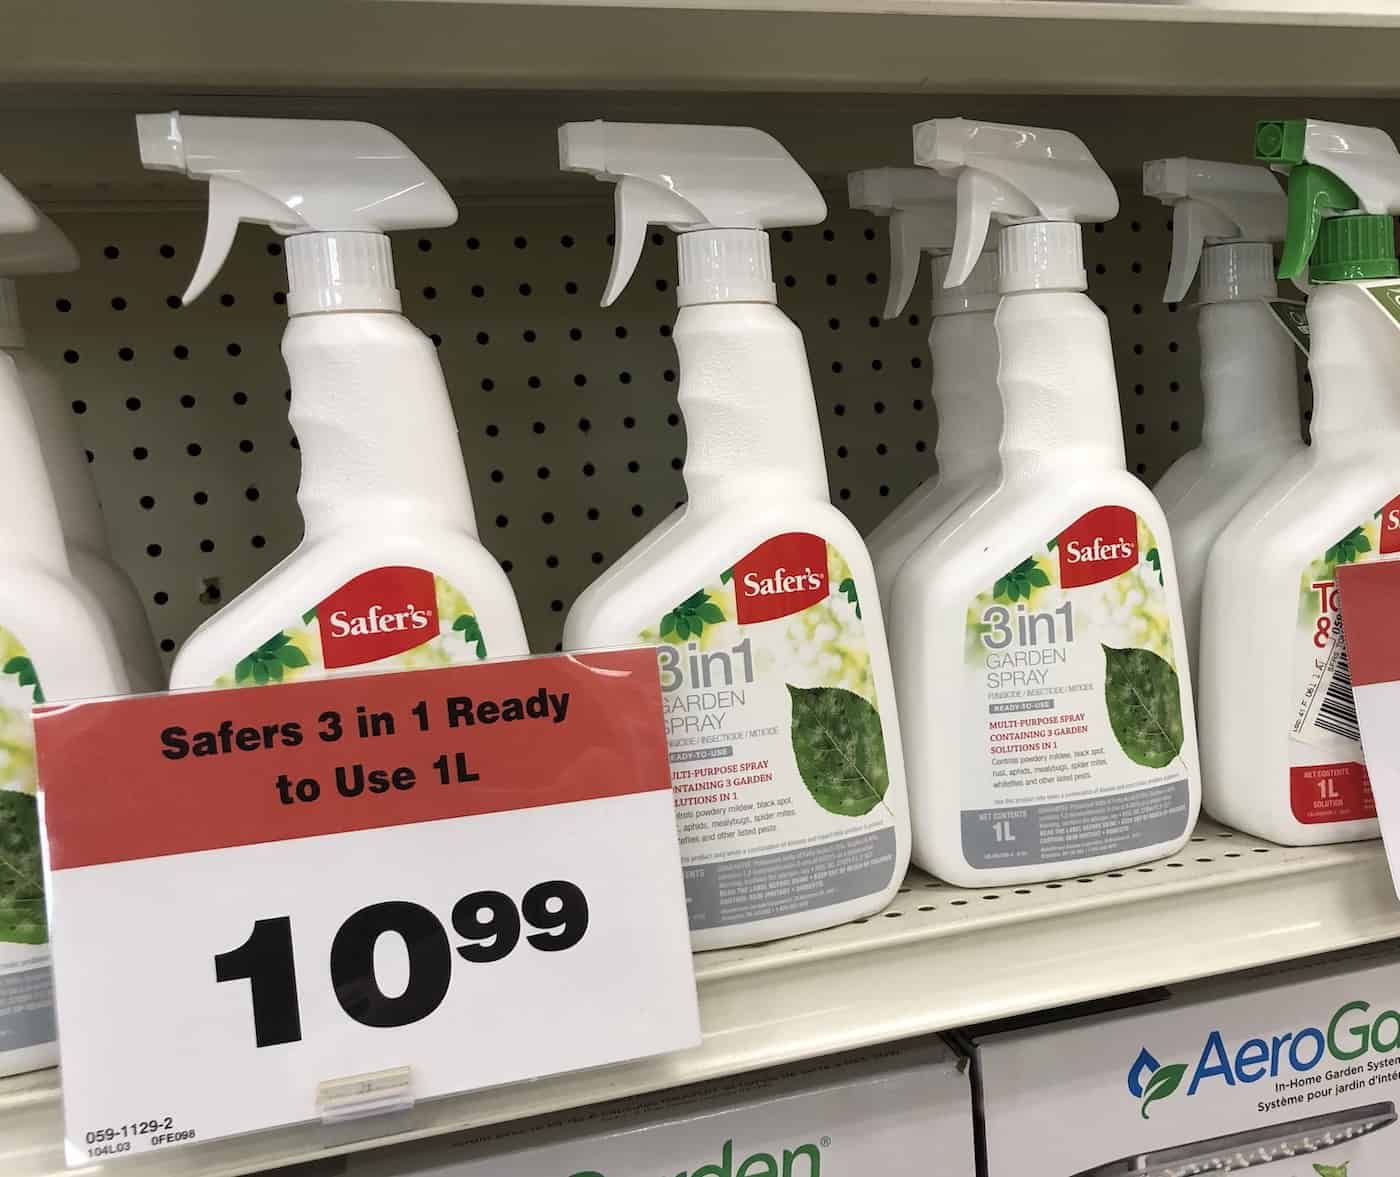 Organic pest spray - safer brand 3-in-1 insecticide